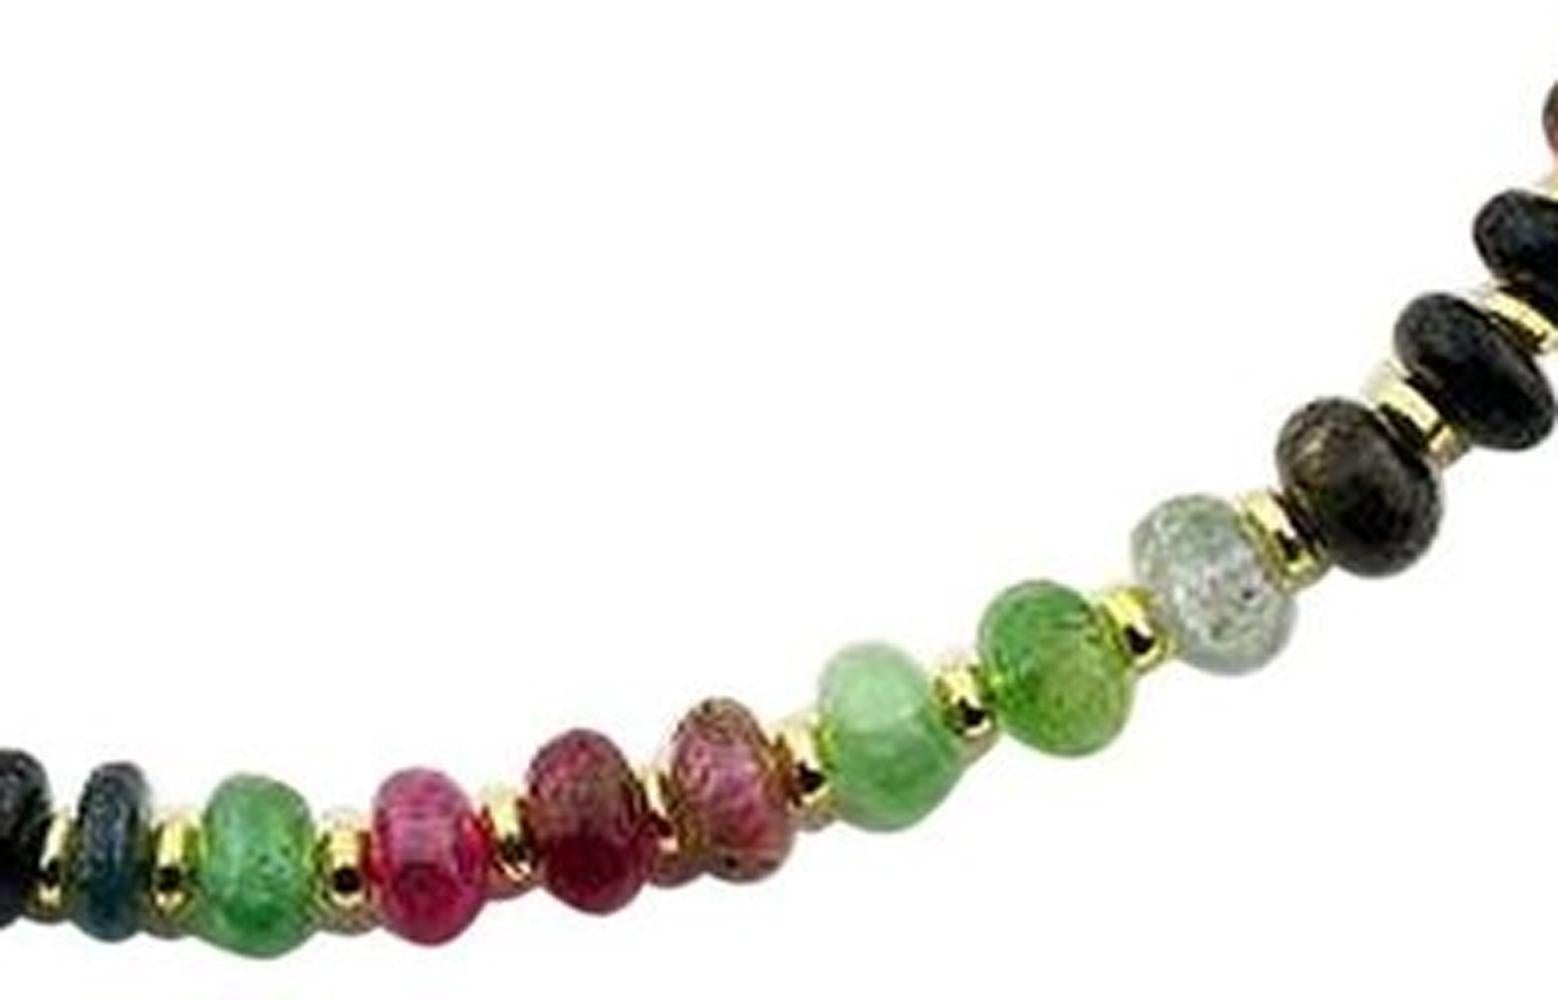 Mixed Cut Gemjunky REAL Unique Beautiful Tourmaline Rondels Cocktail Necklace